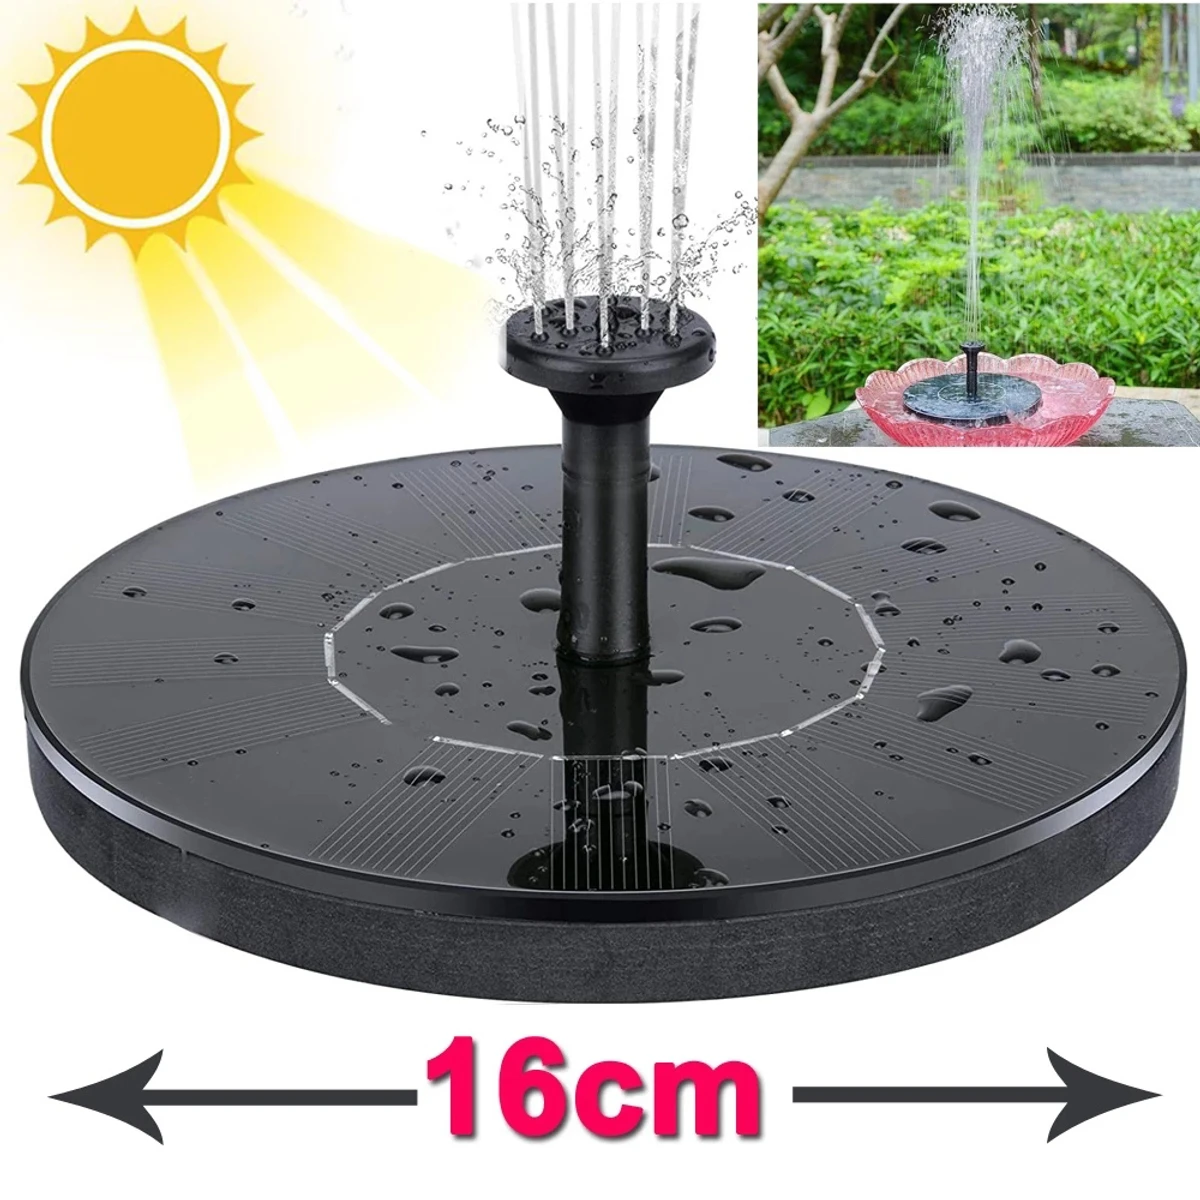 2.5W Solar Fountain Pump Solar Water Pump, AISITIN Floating Fountain with 6 Nozzles, for Bird Bath, Fish tank, Pond Indoor